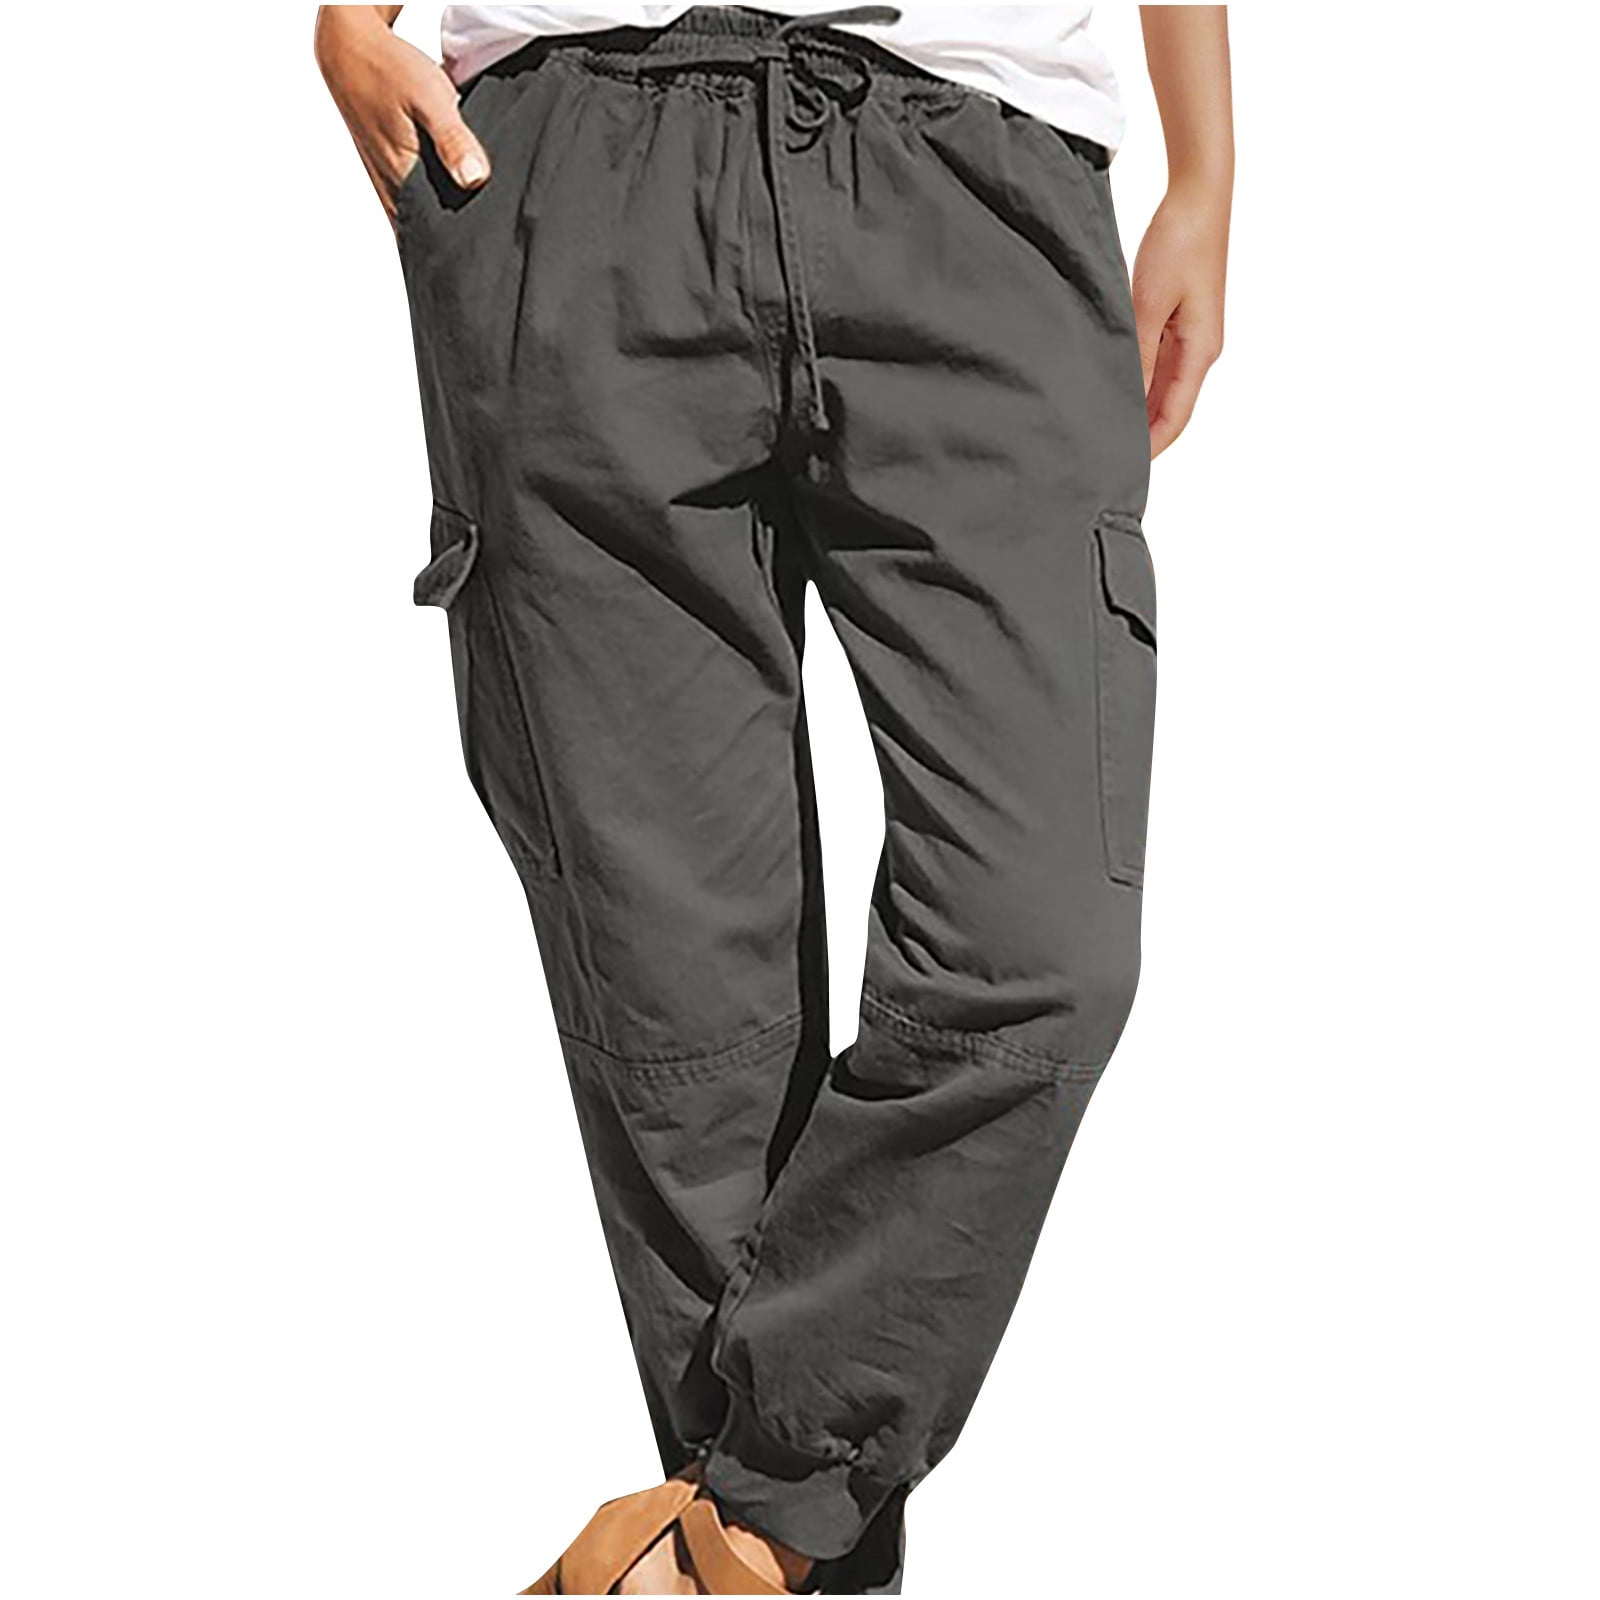 Women's Hiking Pants Lightweight Quick Dry Joggers Pants from Bangladesh